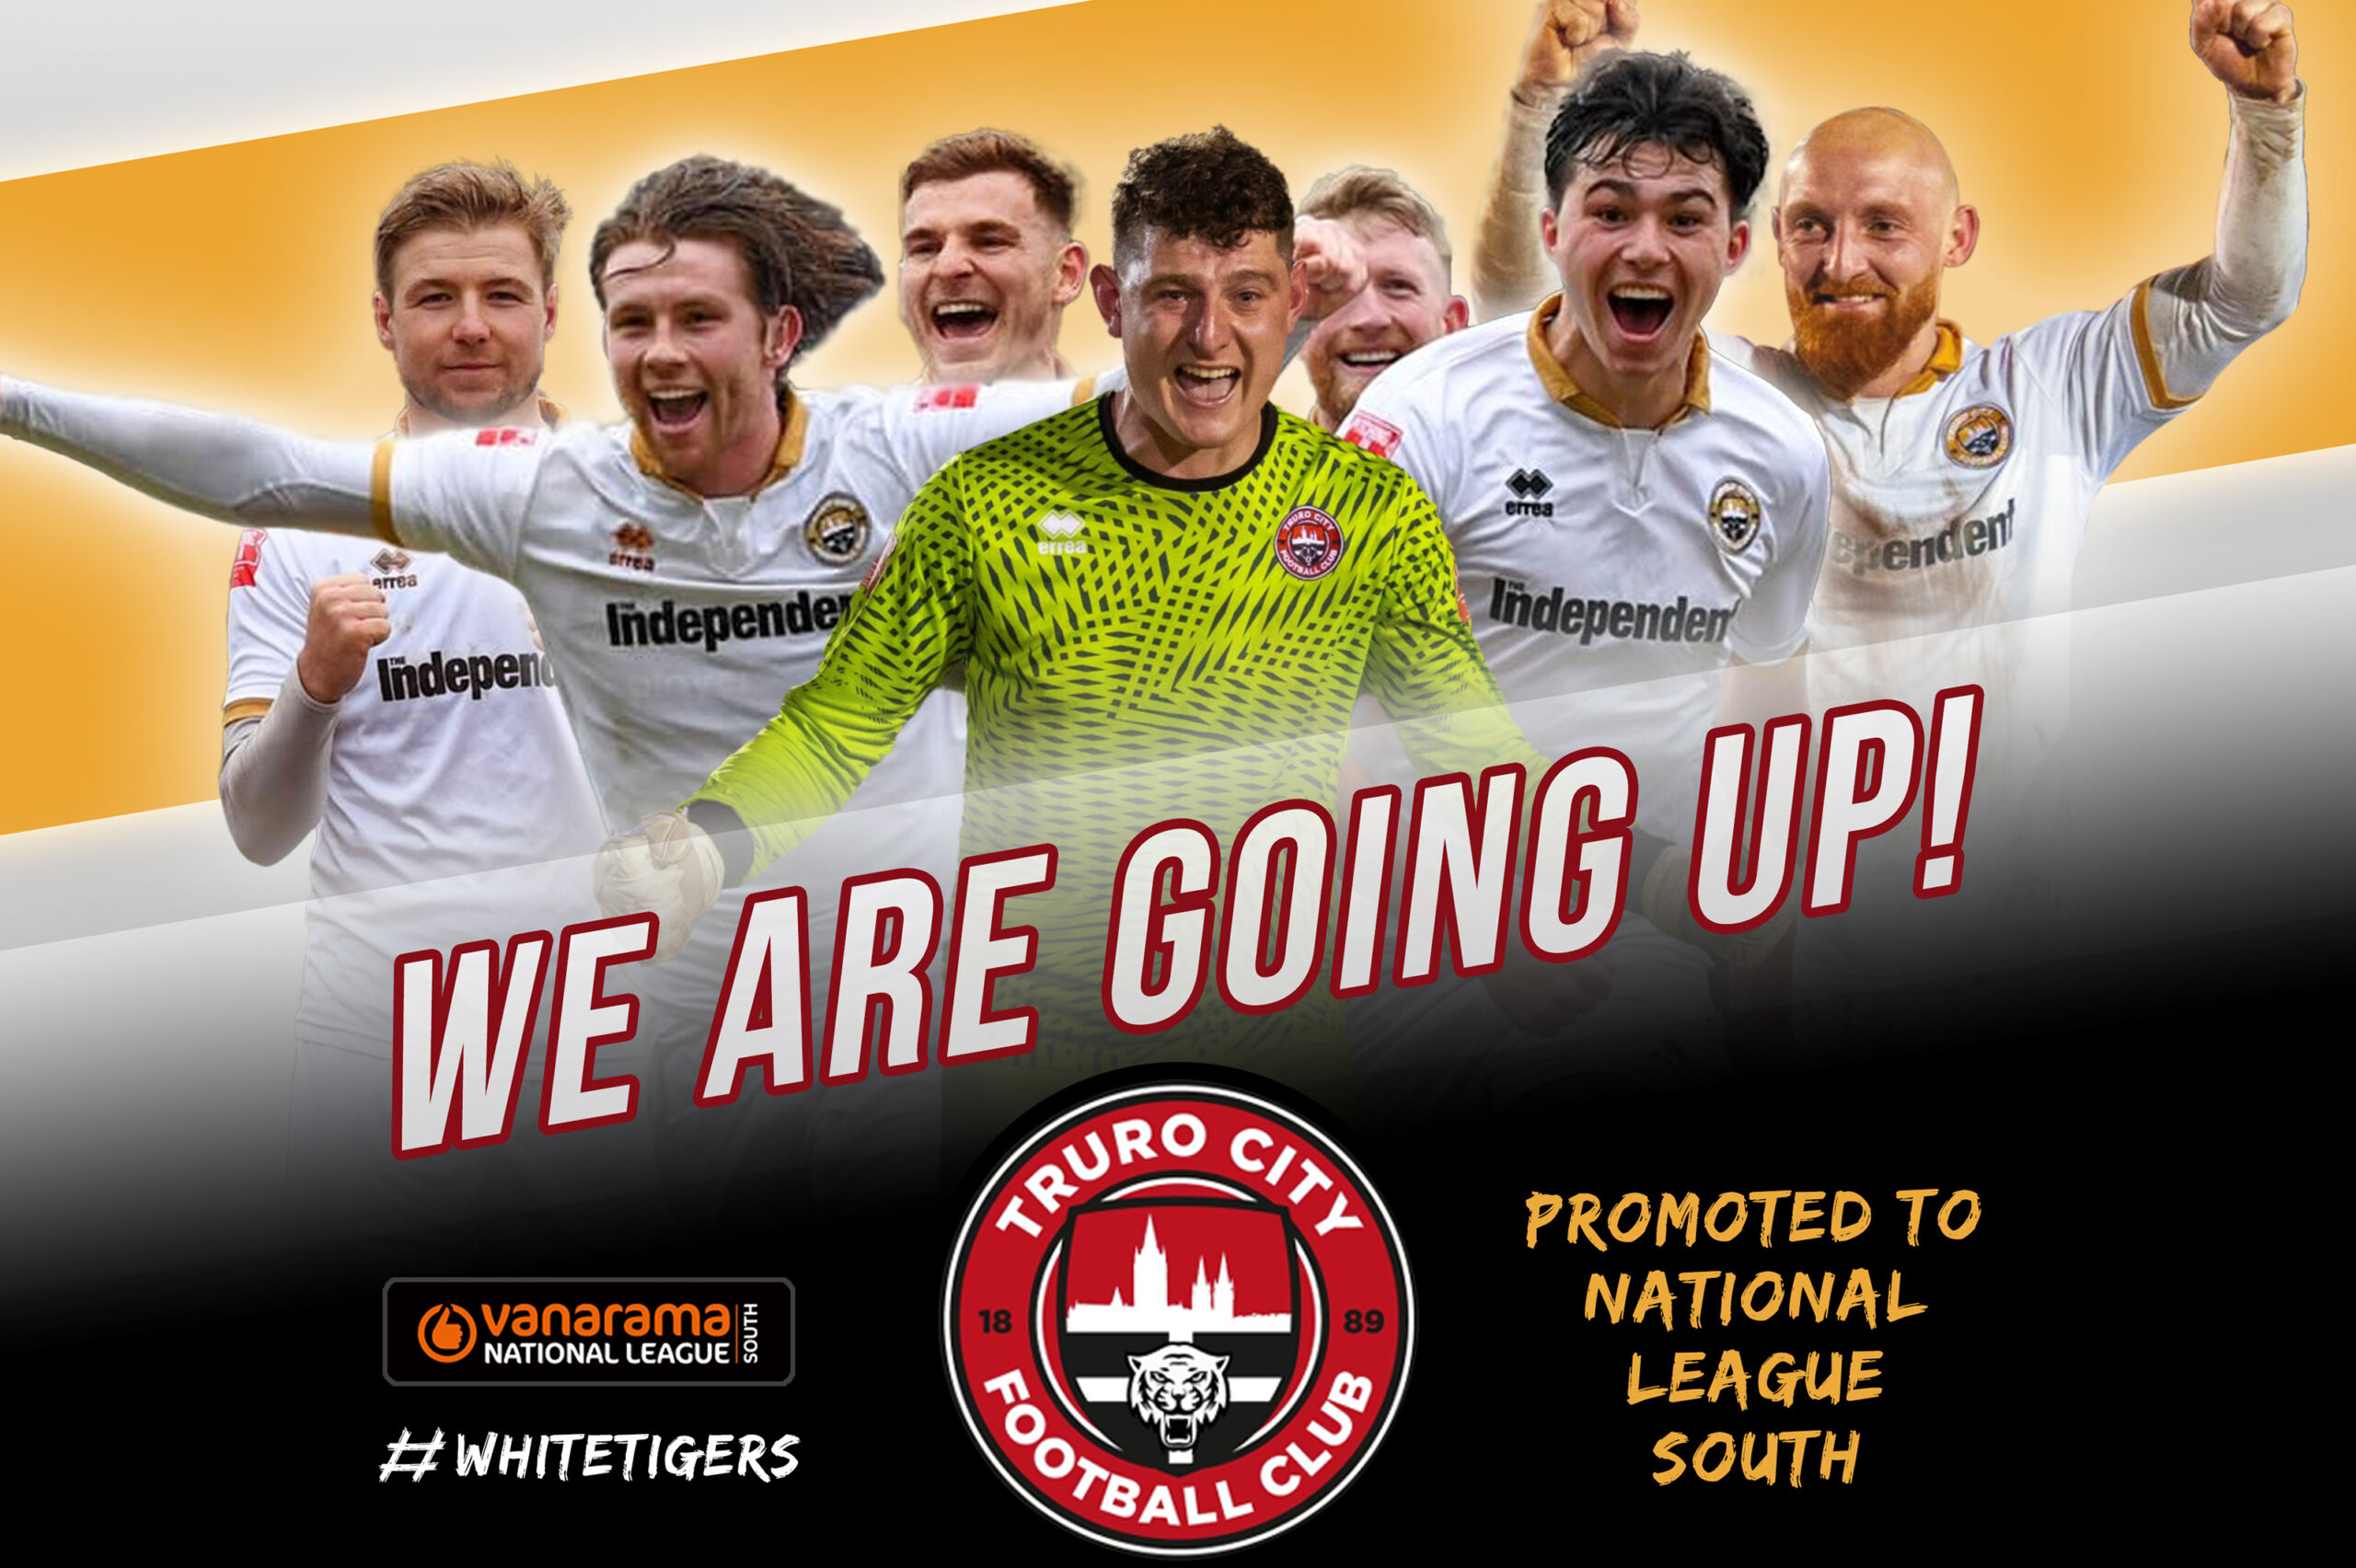 Social Media Graphic for Truro City Football Club. Made by Jon Glanville - Plymouth Graphic Designer.